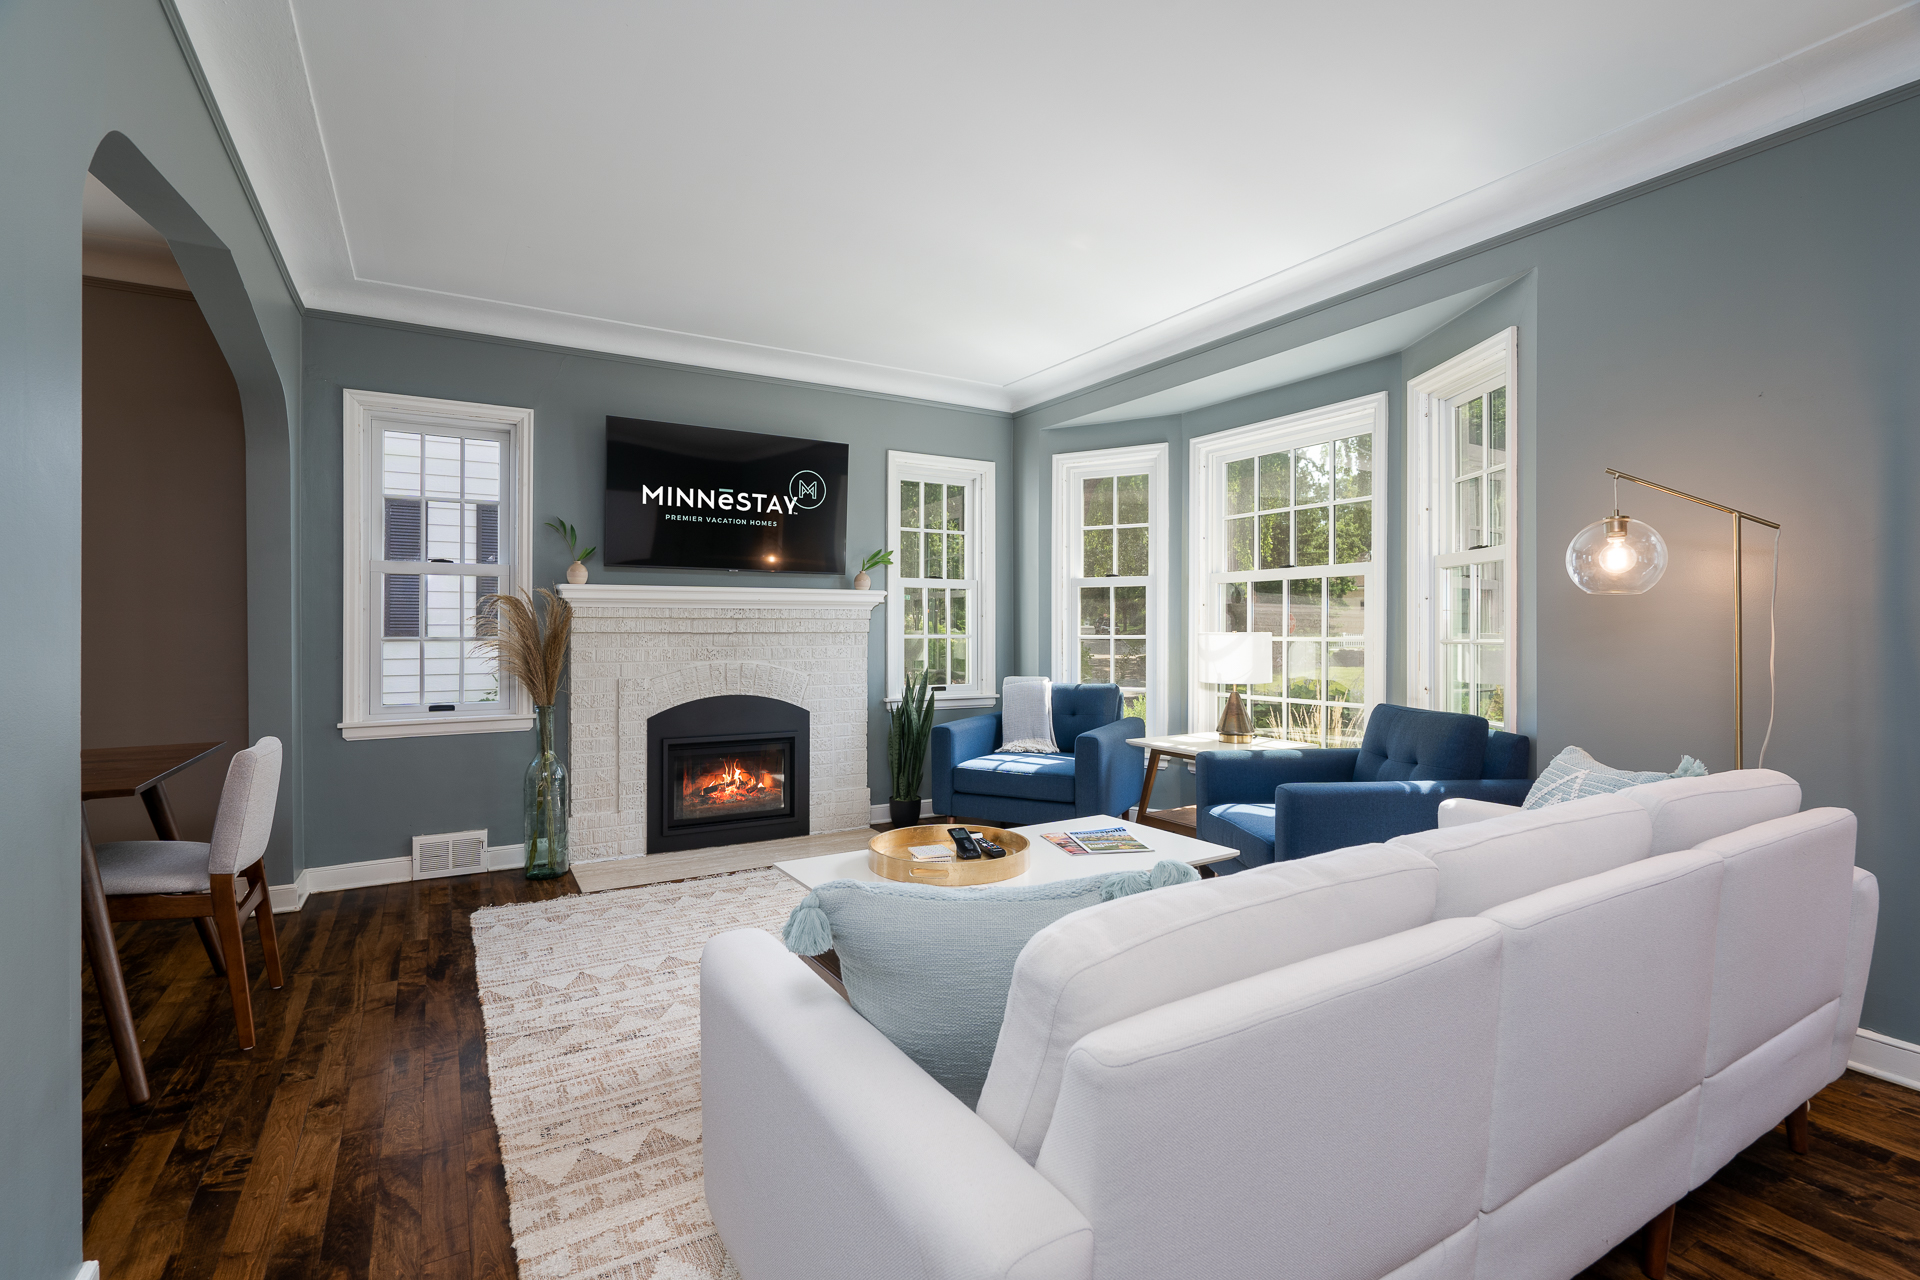 Beautifully appointed living room, both bright and cozy for gathering your group